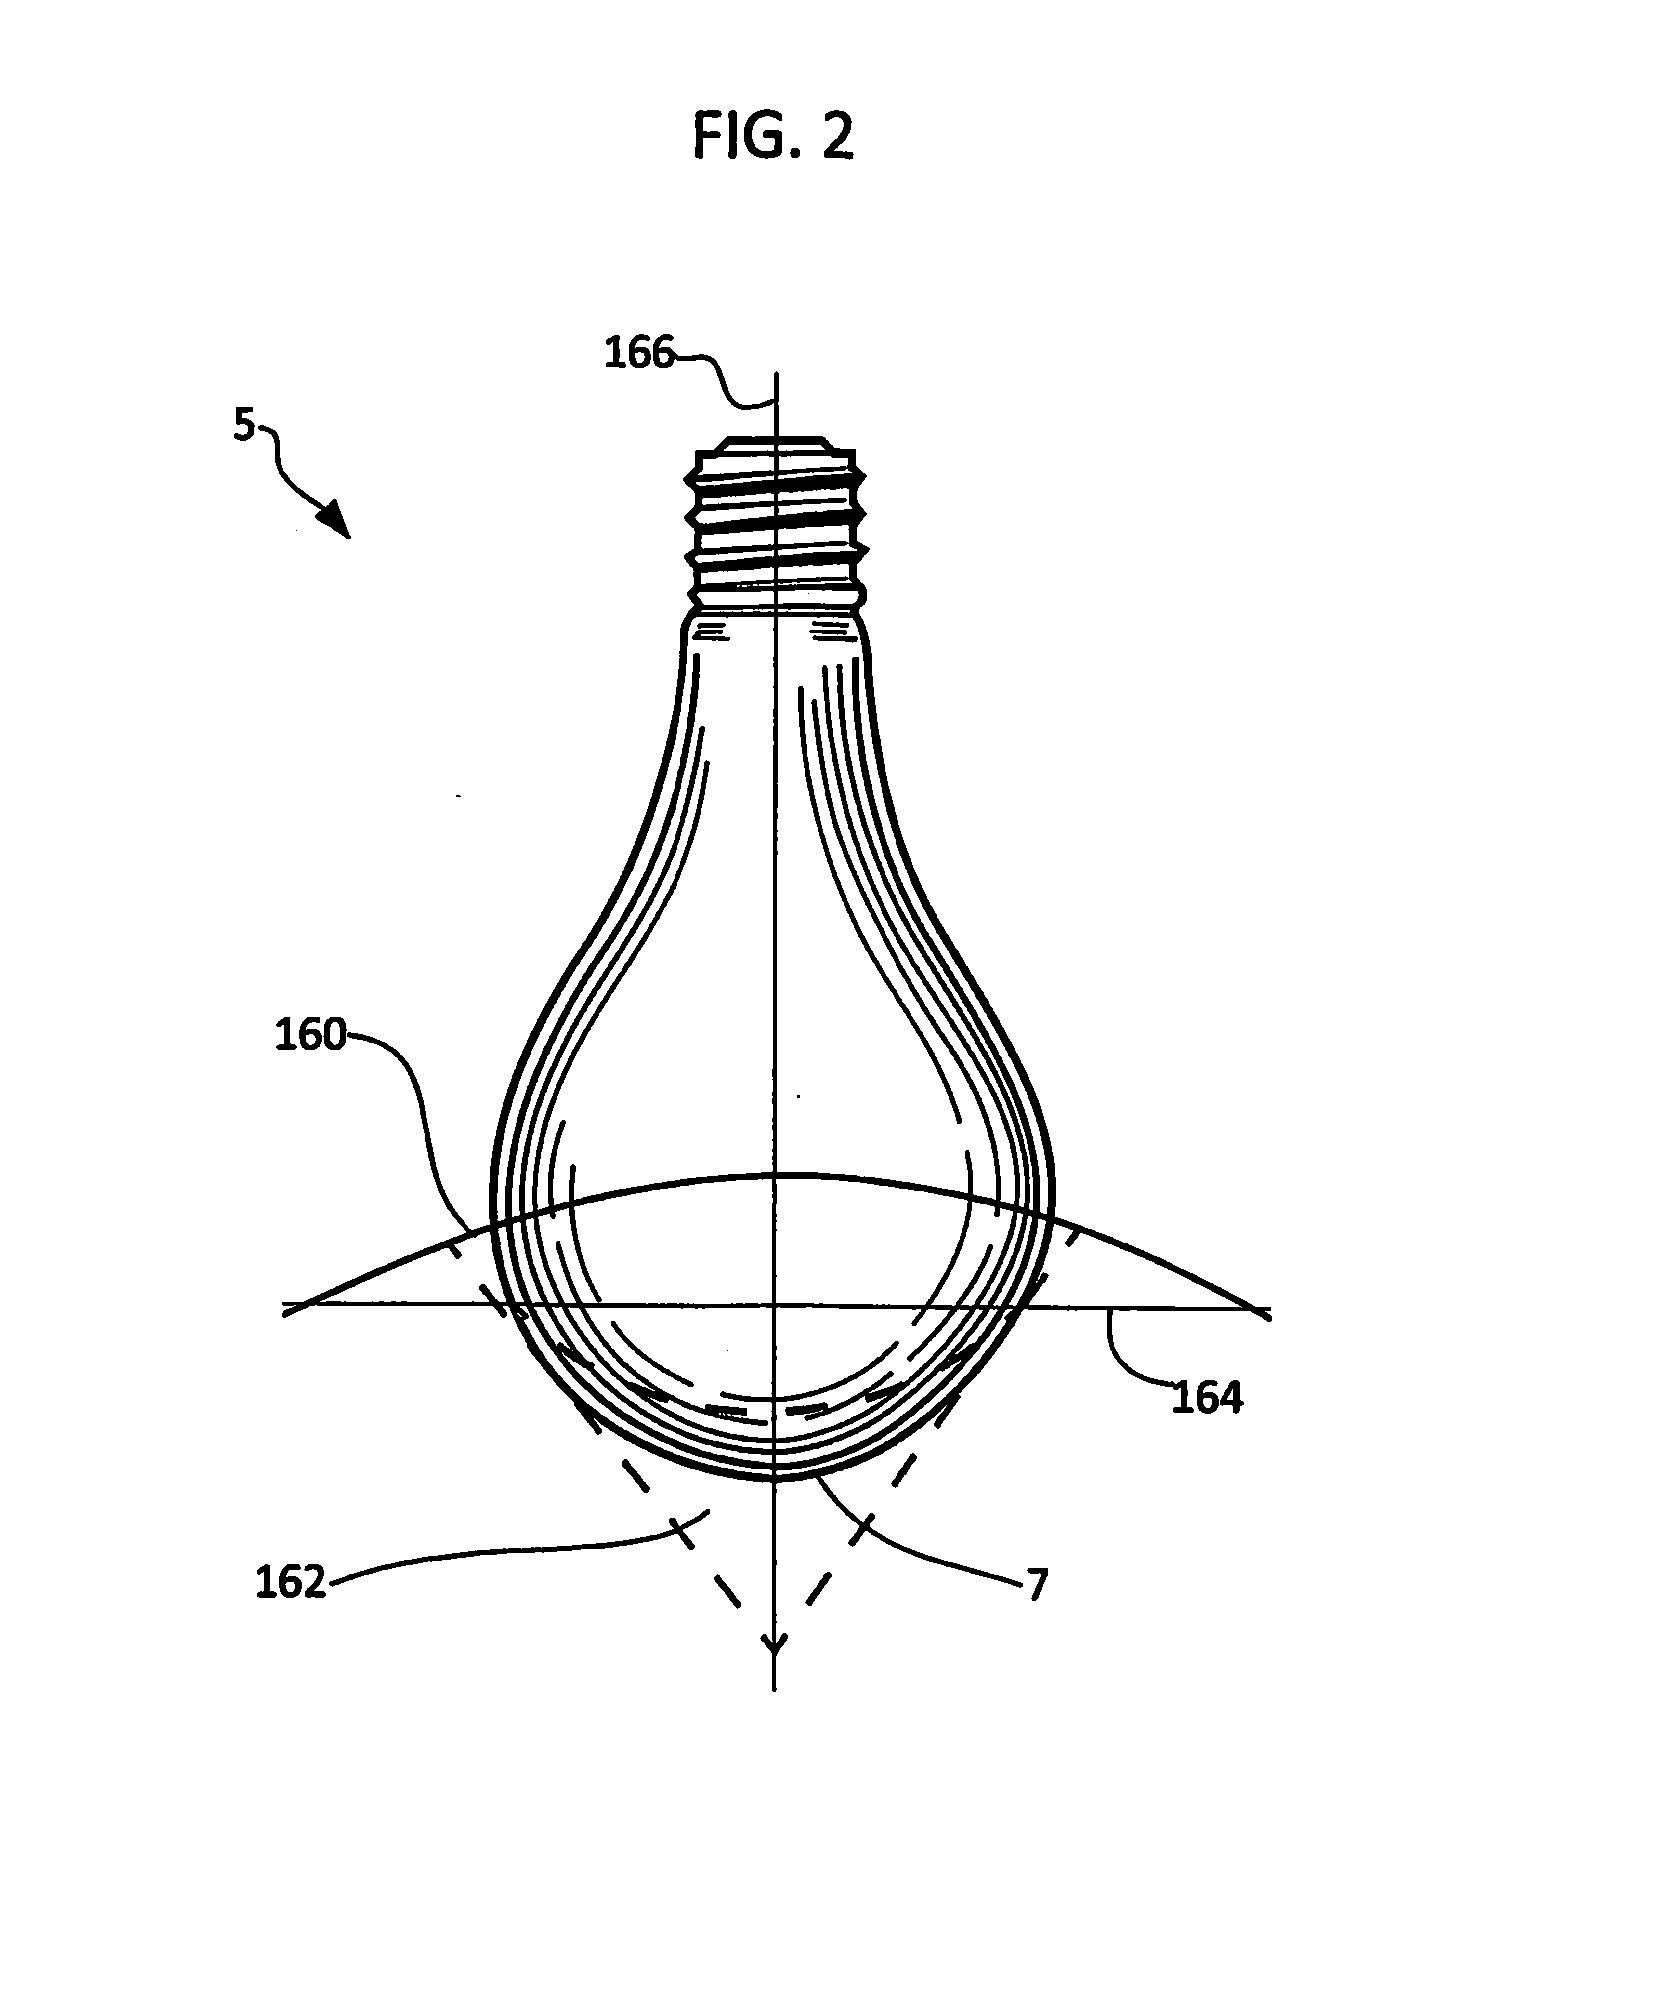 Light Bulb Installation and Removal Tool